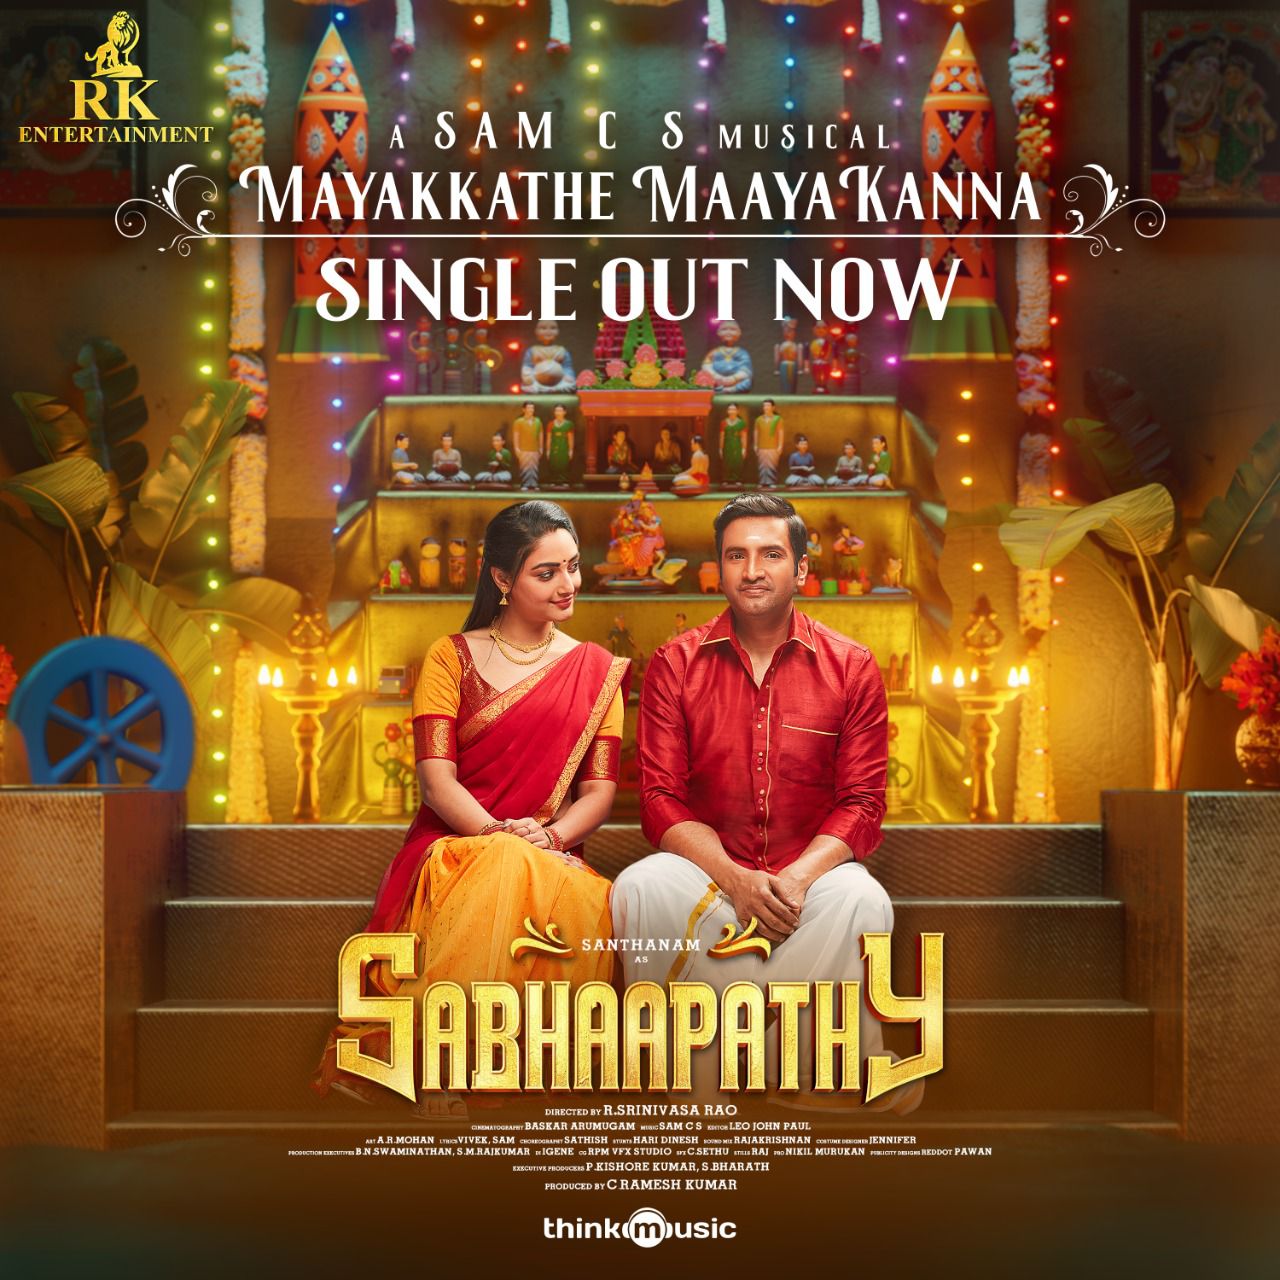 Here is the beautiful first single from Sabhaapathy movie